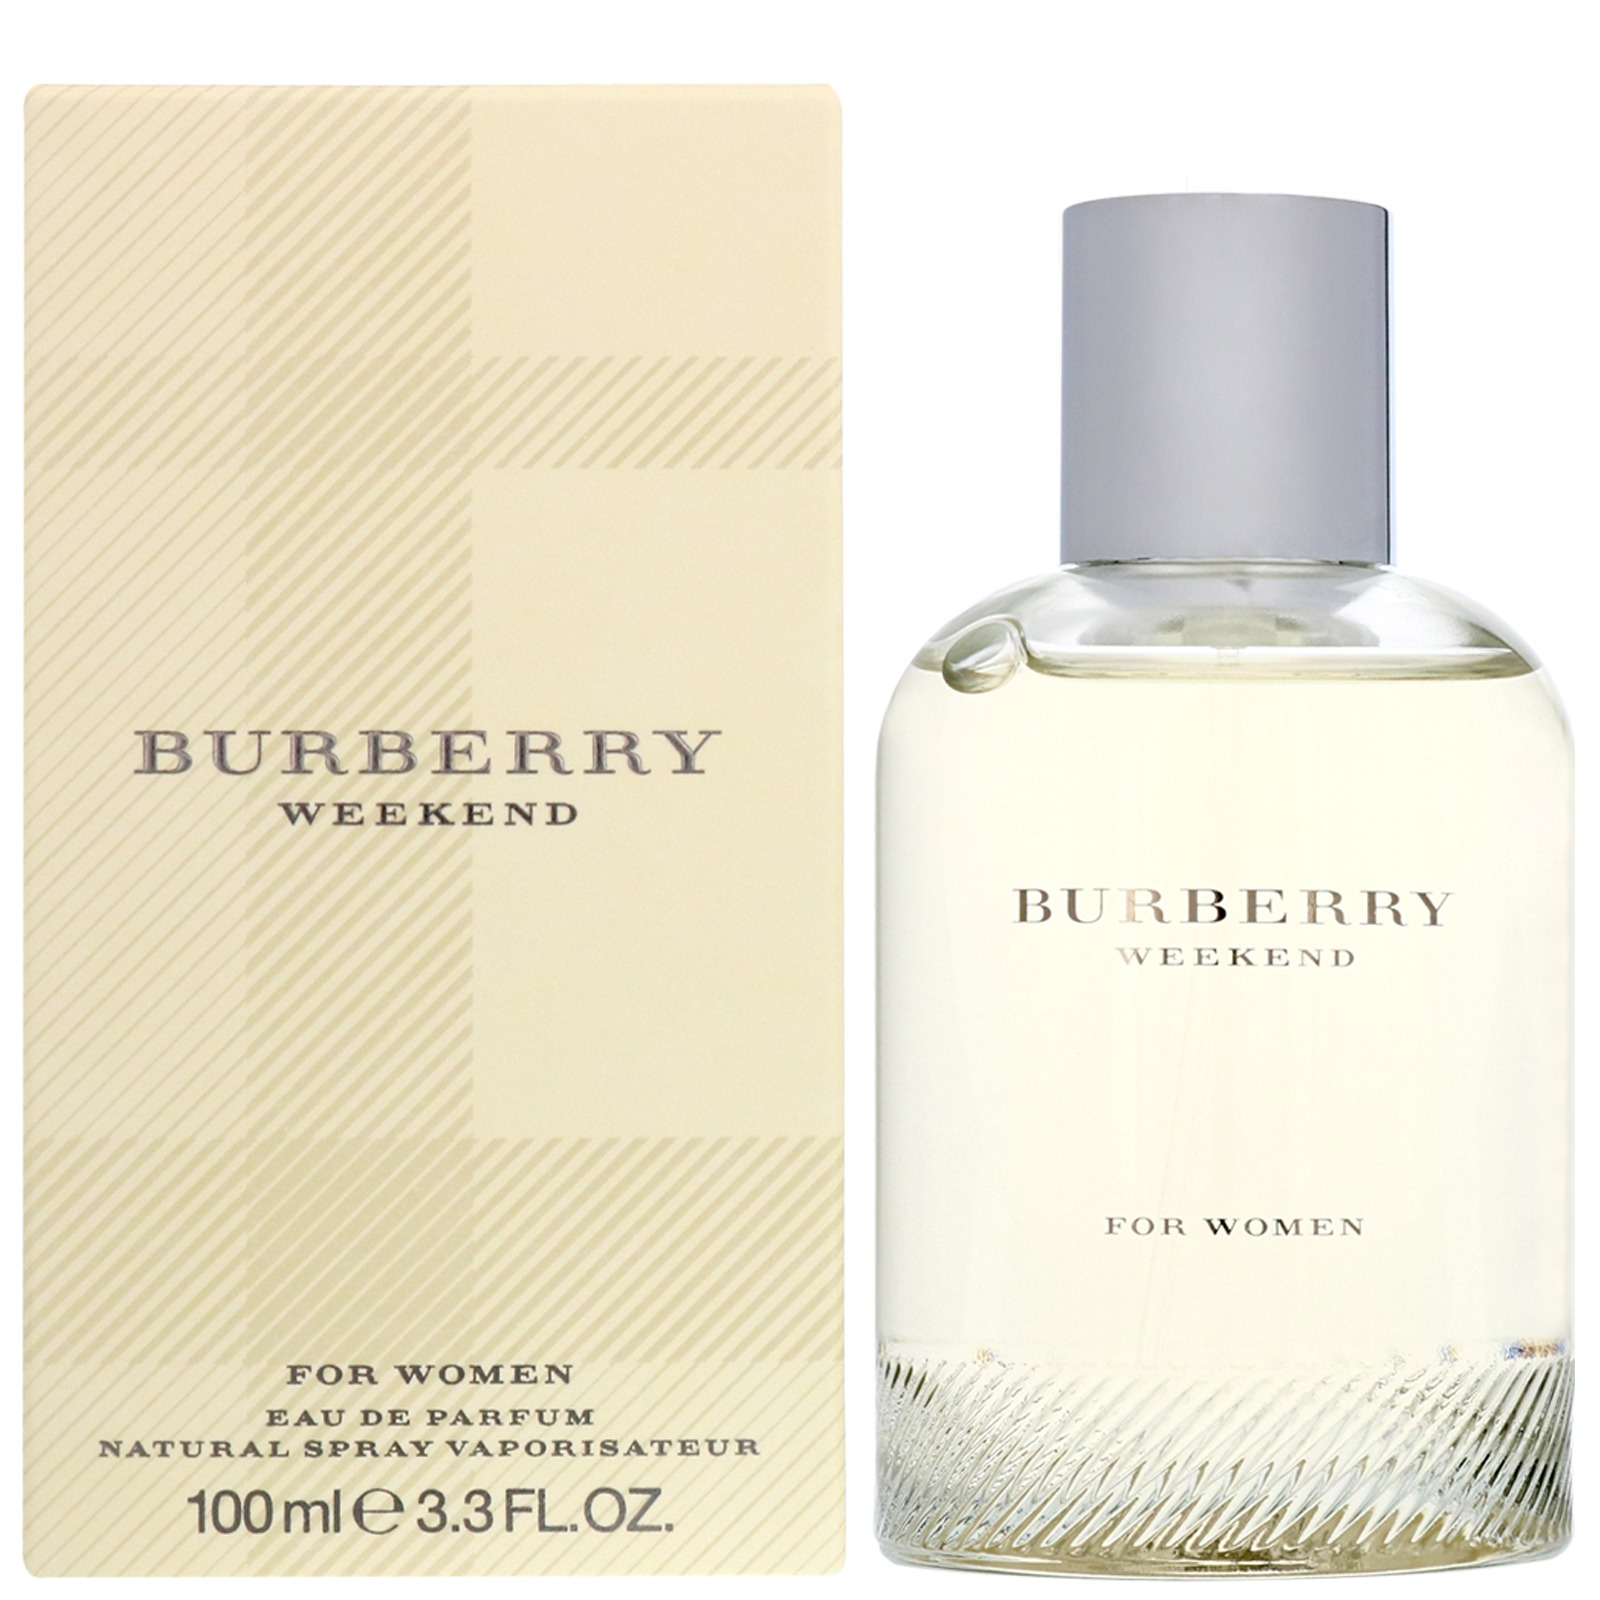 BURBERRY WEEKEND EDP 100ML FOR WOMEN (NEW)